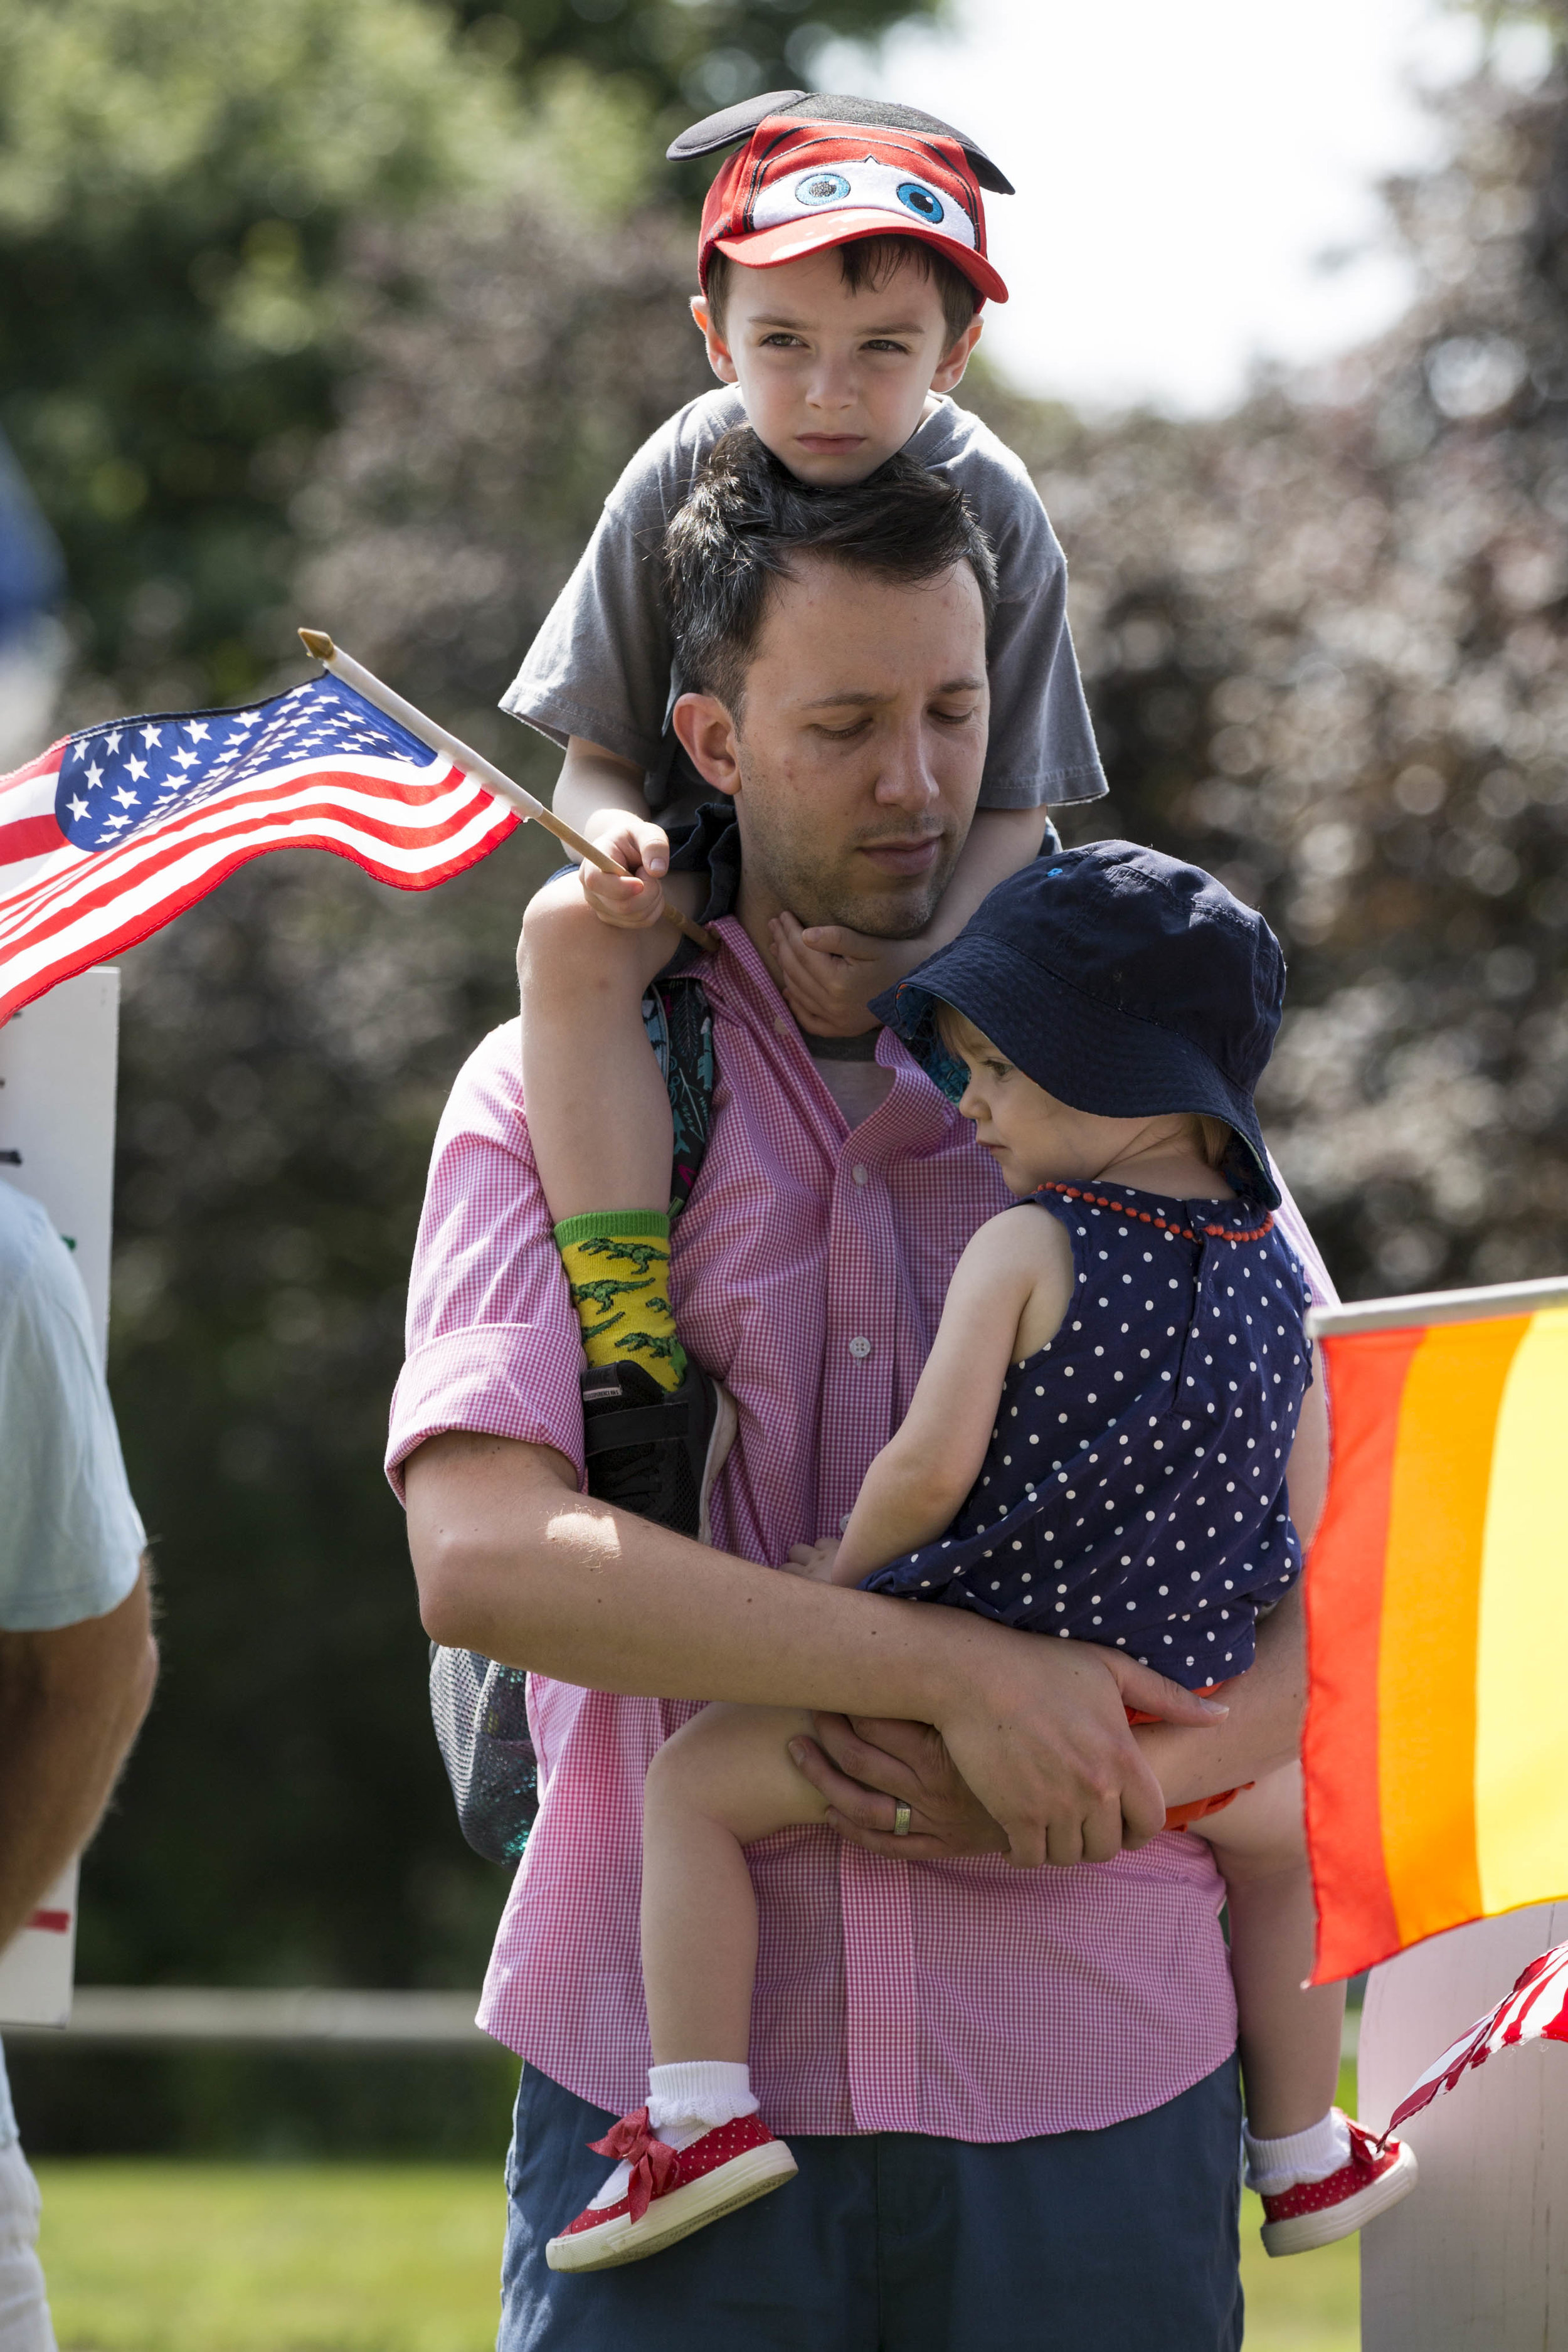  Lucas Skorczeski holds his children Arlo, 5, and Delia, 1, during the Peacekeepers Unite rally in the Falmouth Village Green on August 13, 2017. The rally was held in response to the white nationalist protest in Charlottesville, Virginia that result